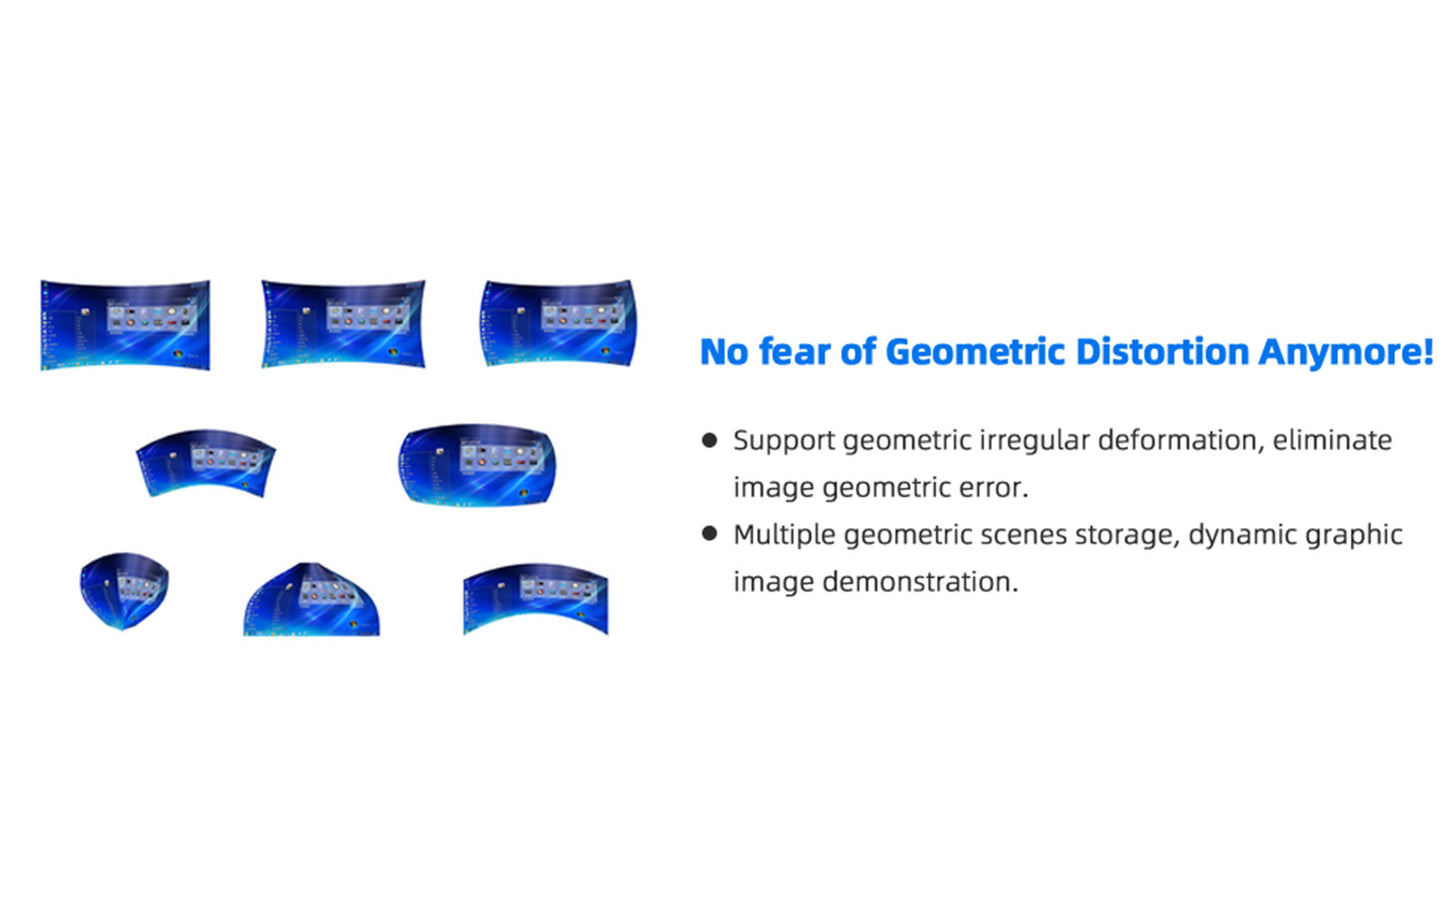 AGT-T-Pro Video Processor- no fear of geomtric distortion